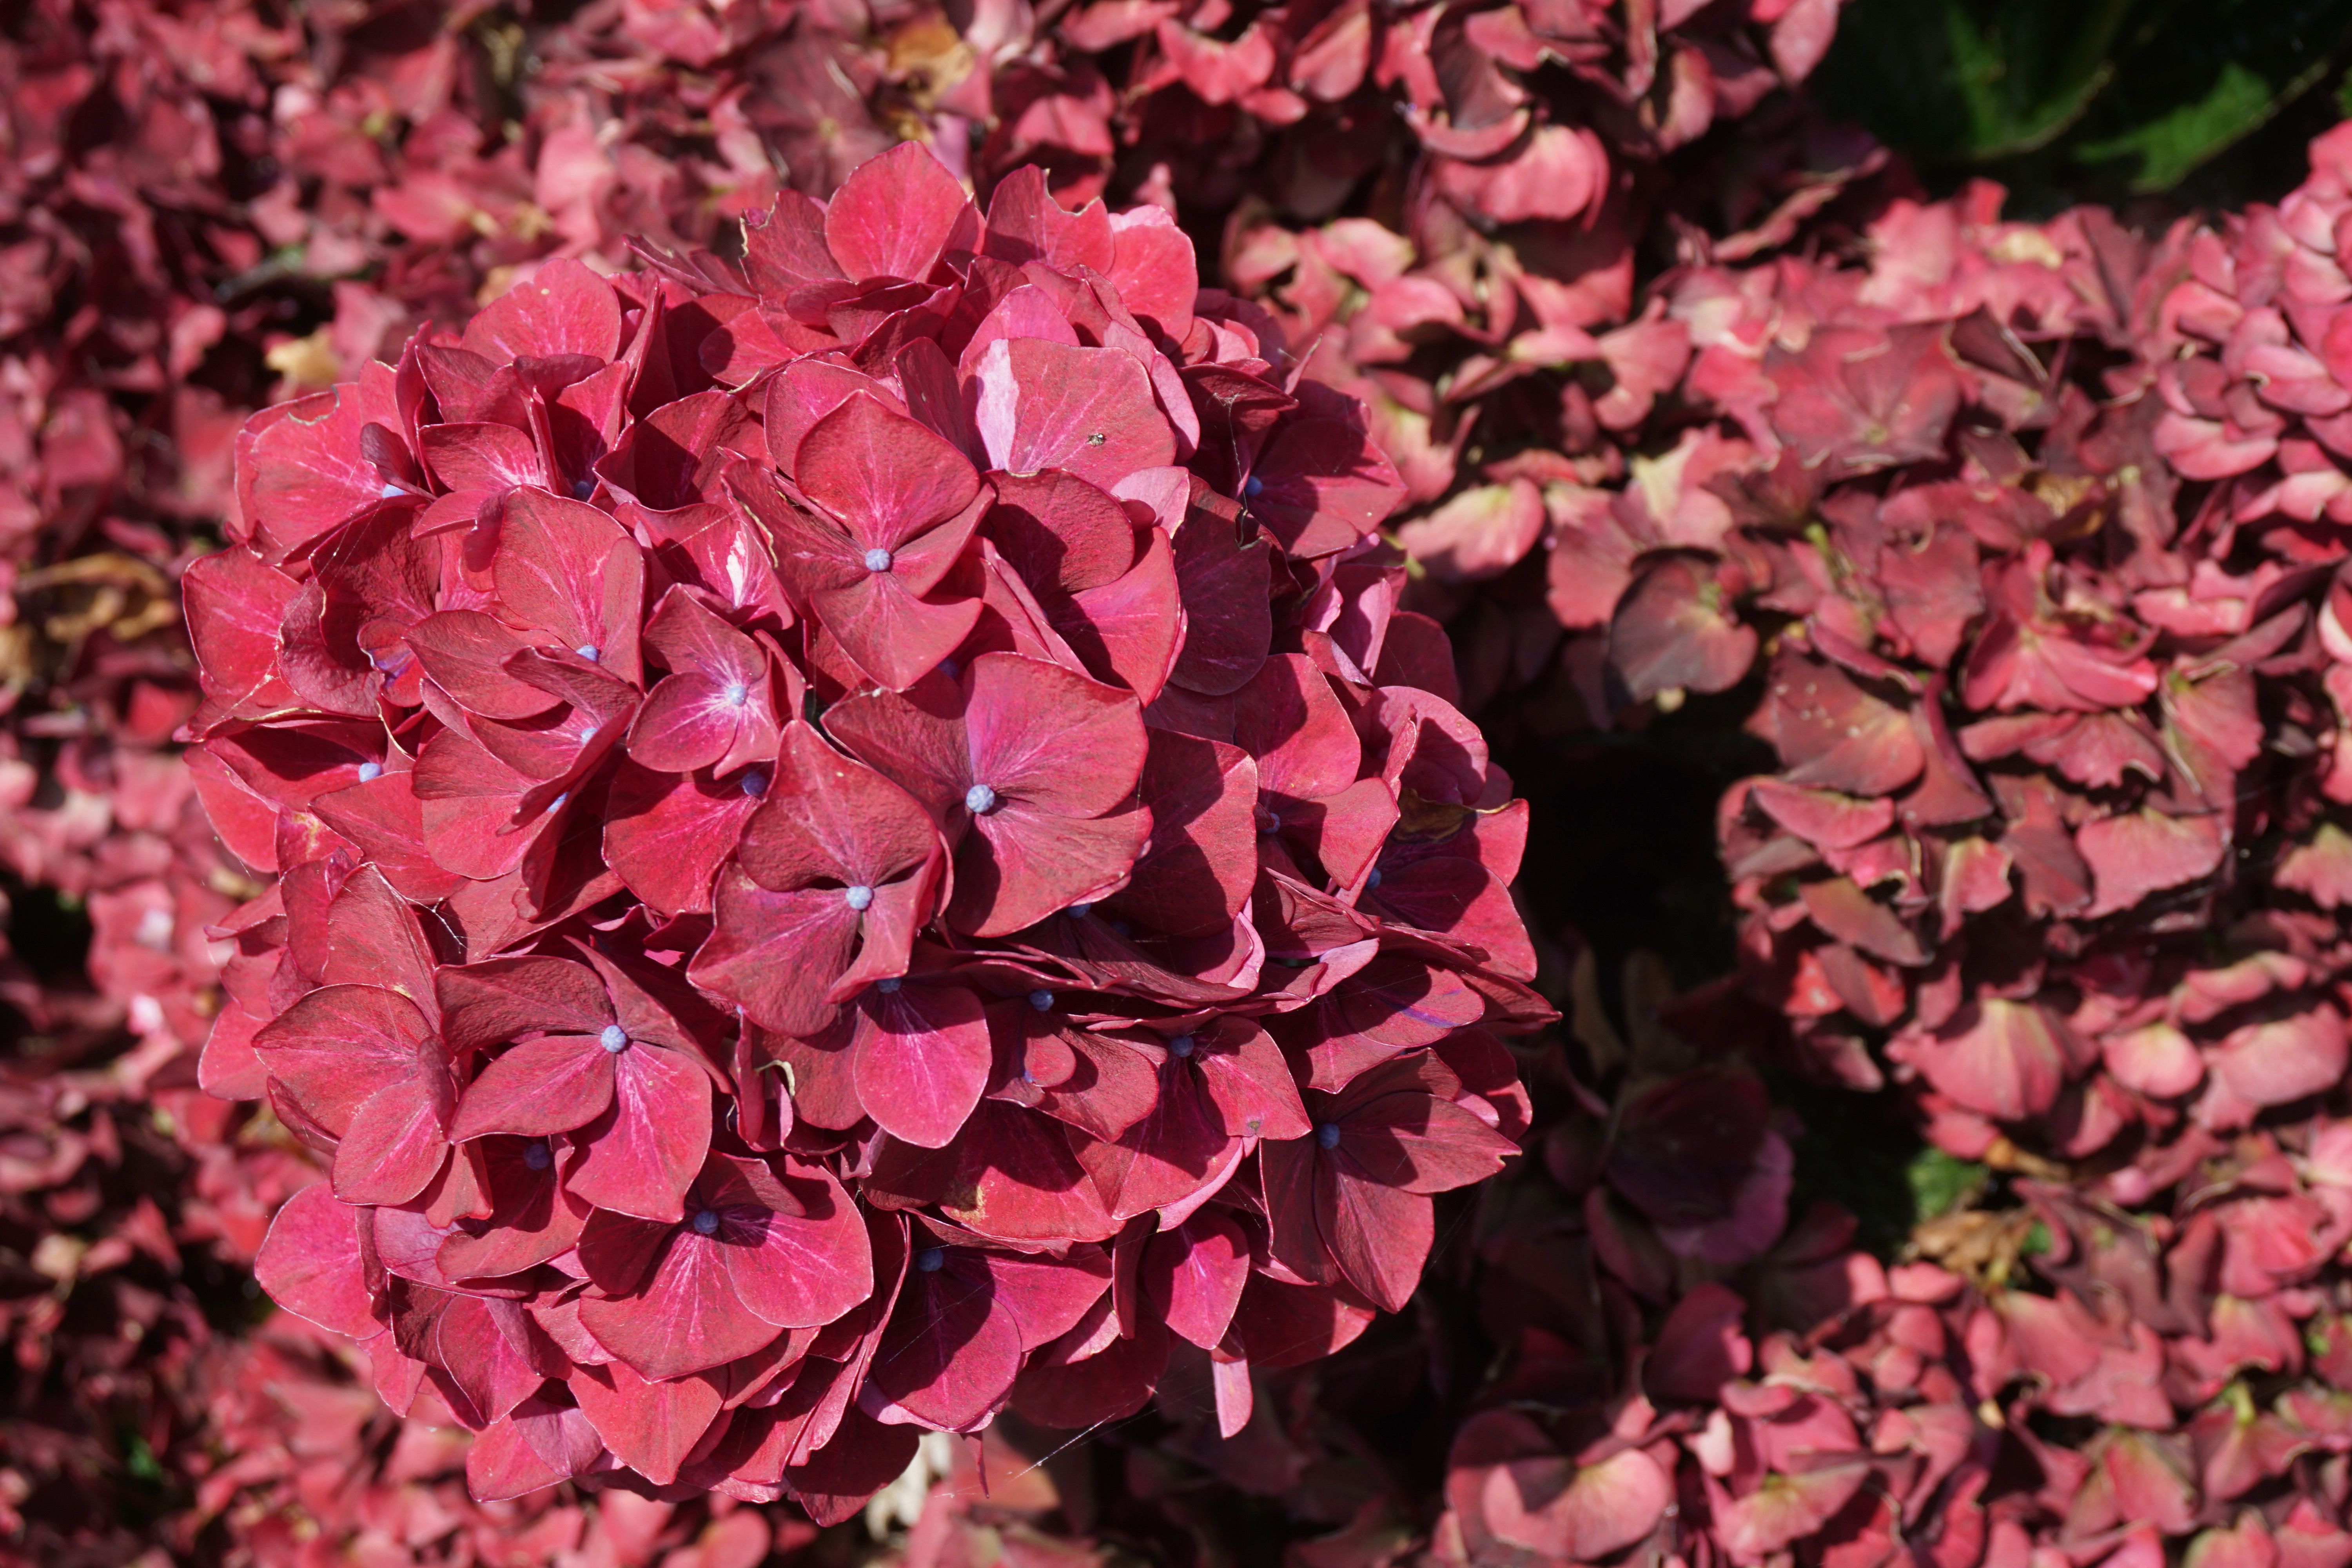 images/plants/hydrangea/hyd-magical-everlasting-crimson/hyd-magical-everlasting-crimson-0006.jpg